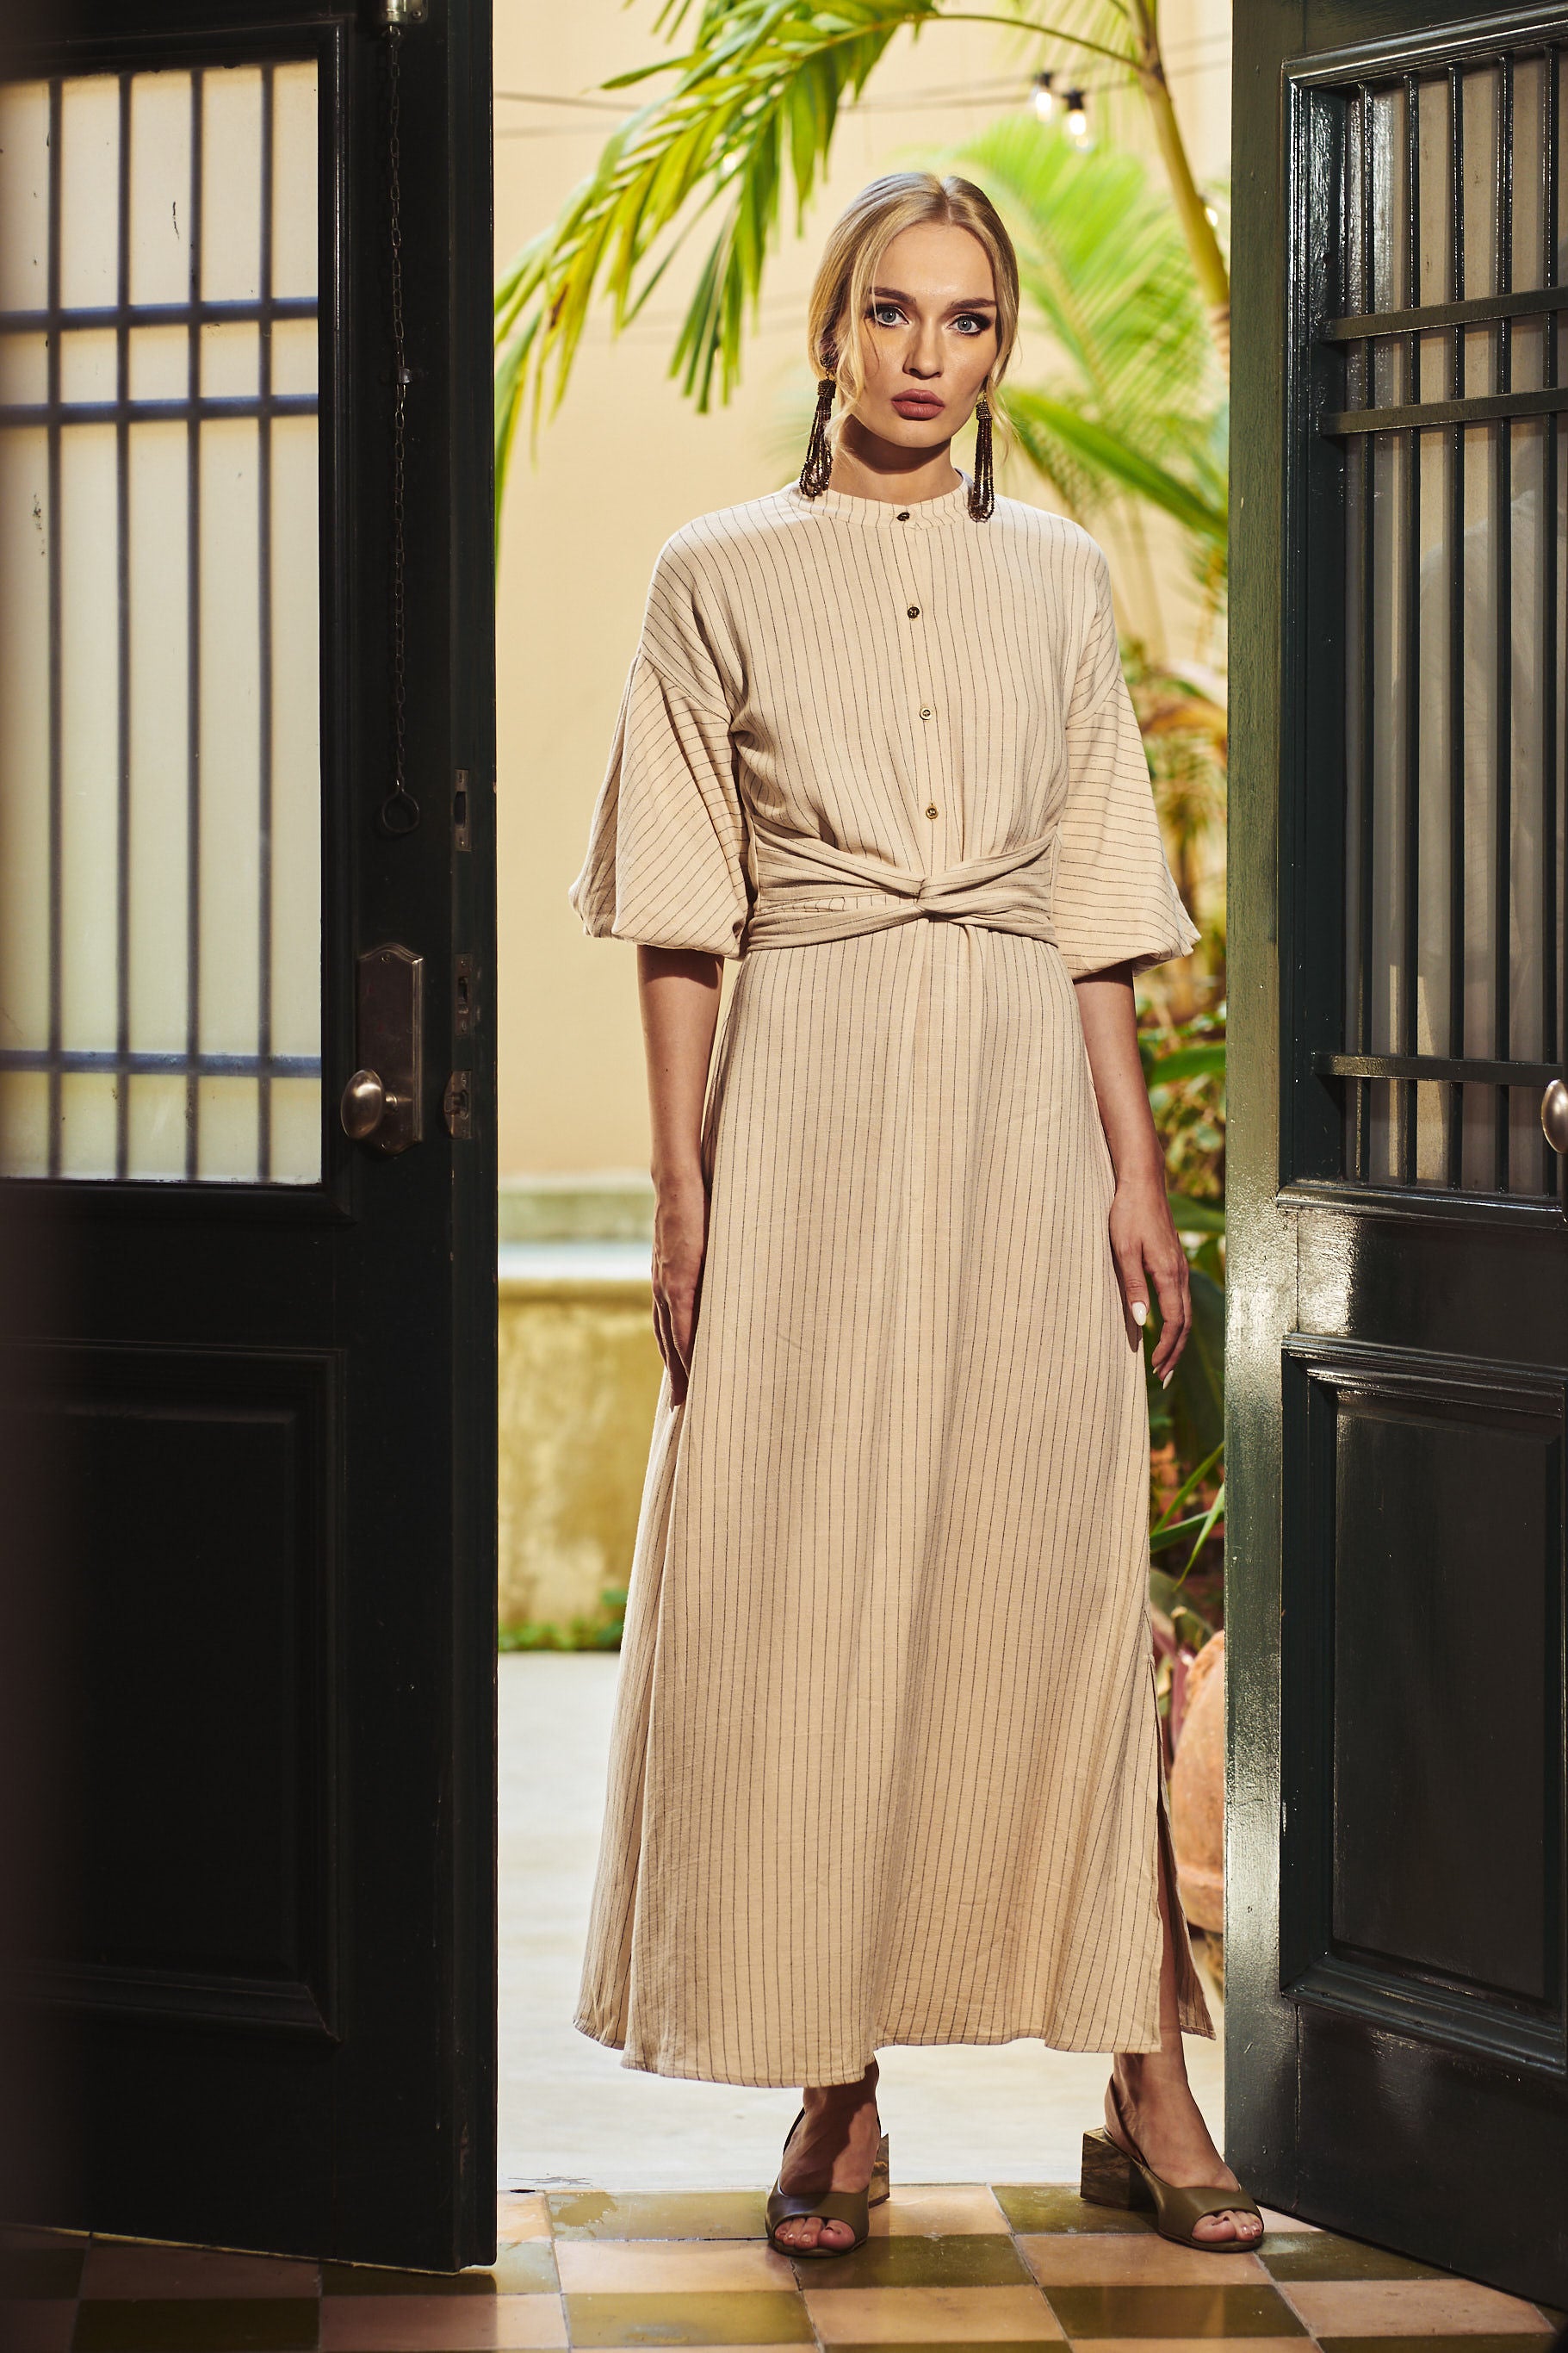 Knotted Maxi Dress - Striped Natural Linen